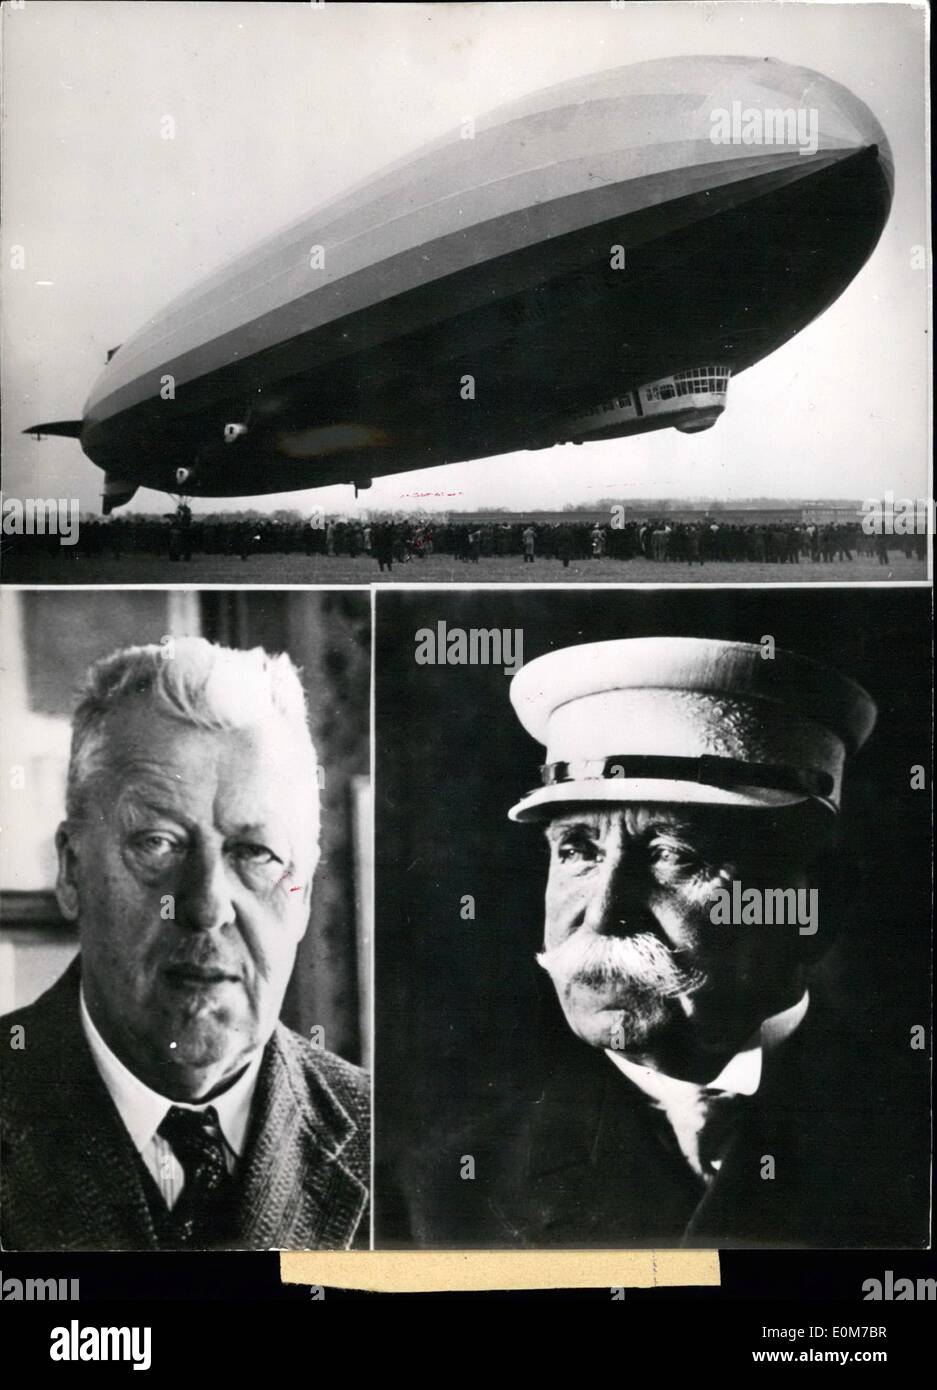 Oct. 10, 1953 - 25 jears ago.. Dr Hugo Eckener flew first over Atlantic with his air-ship ''Graf Zeppelin'' from Germany to America. Photo Shows Dr. Eckener, (left), Graf Zeppelin, the father of the idea of the air-ship (right), and air-ship ''Graf Zeppelin' Stock Photo